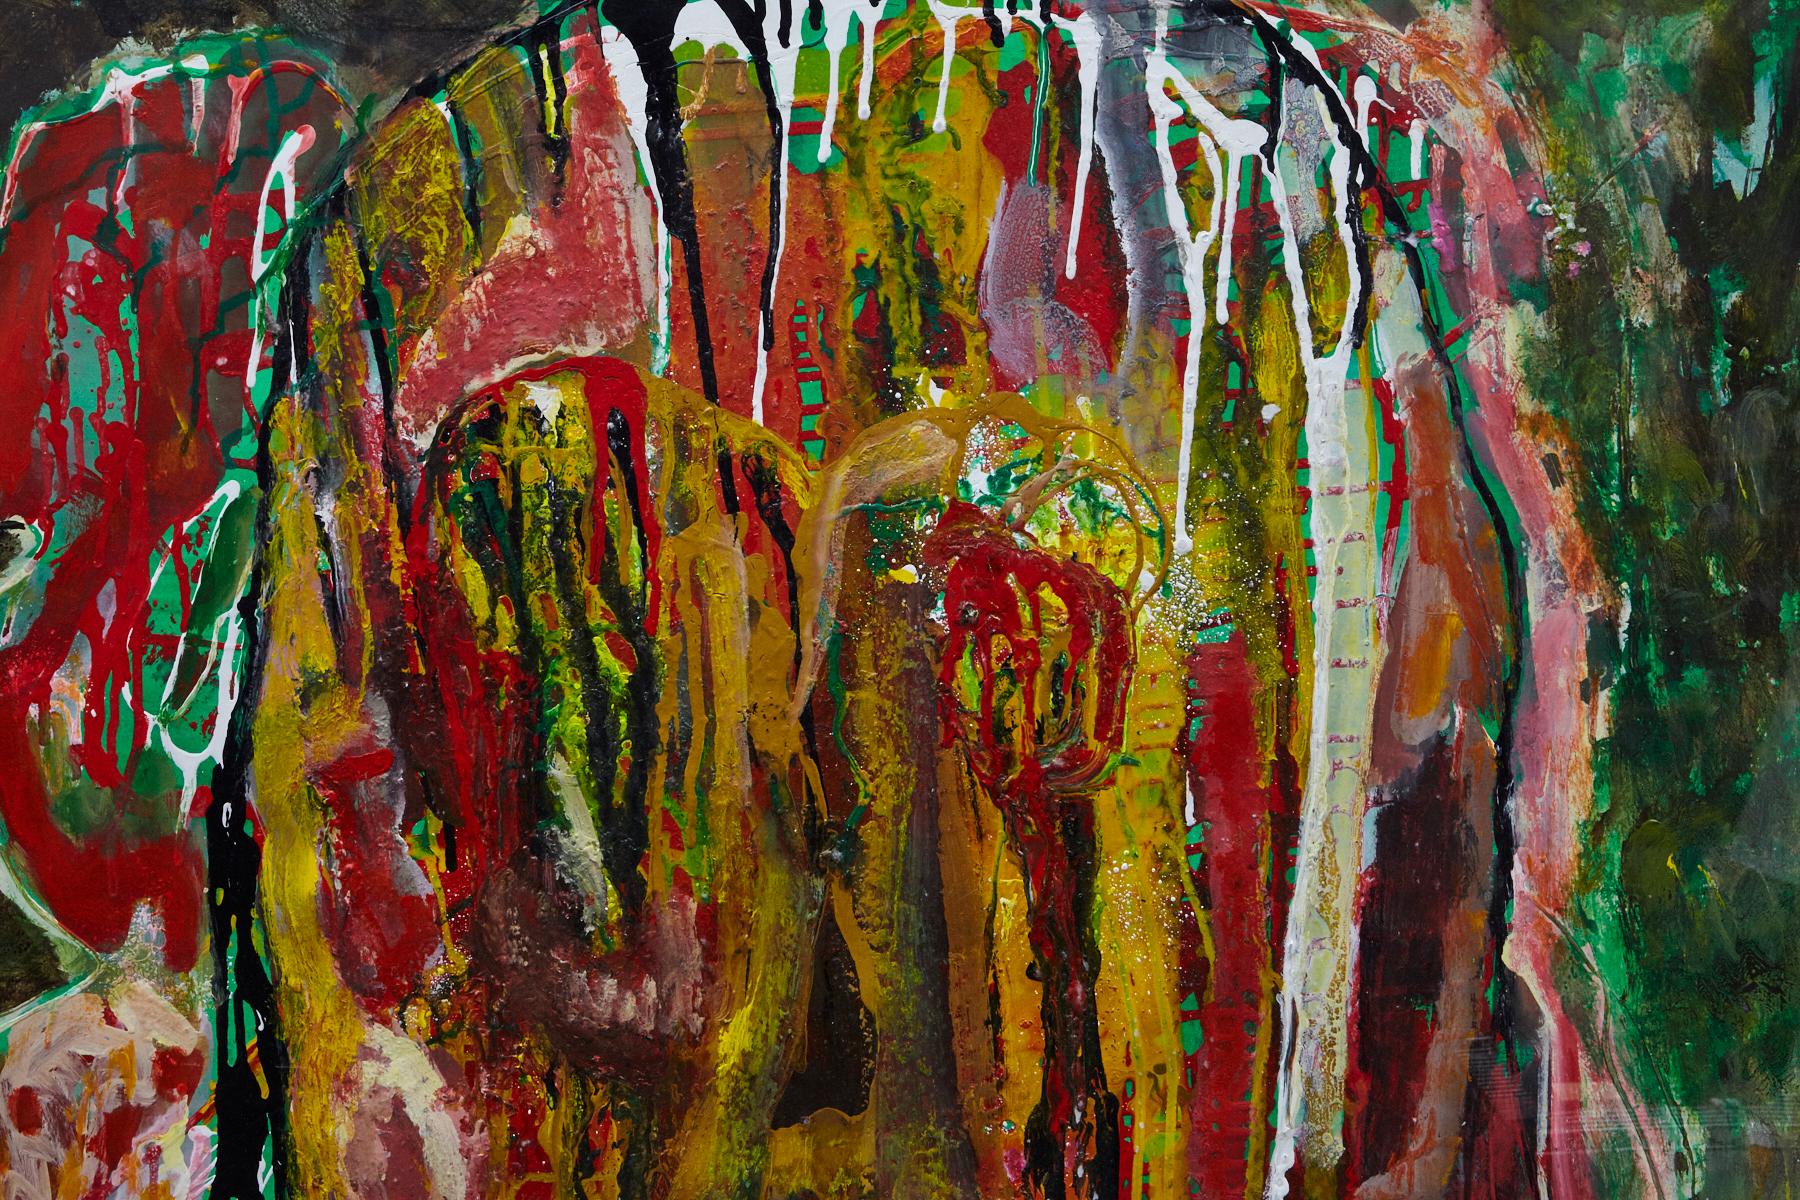 Life Does Not Care Whether You Like It Or Not - Abstract Expressionist Painting by Wyona Diskin